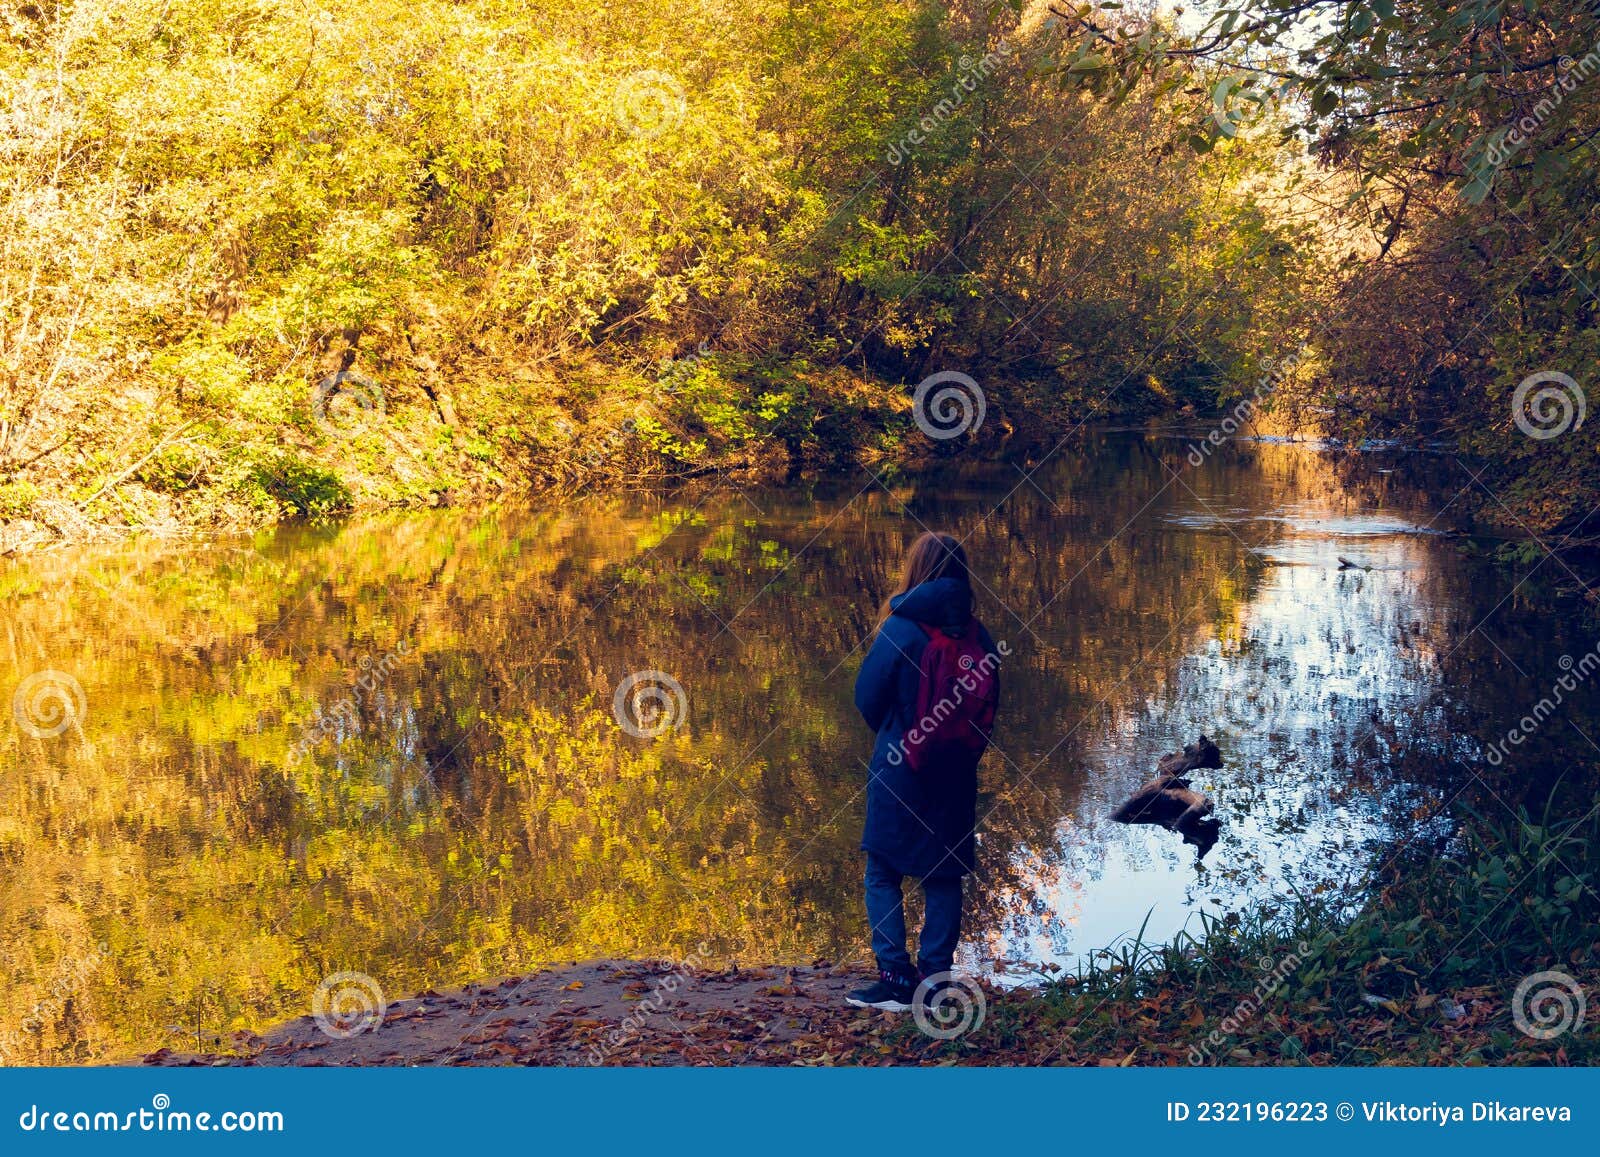 Autumn Colors, in the Bosom of Nature, are Reflected in the Waters of River. Stock Image - Image of bank, morning: 232196223